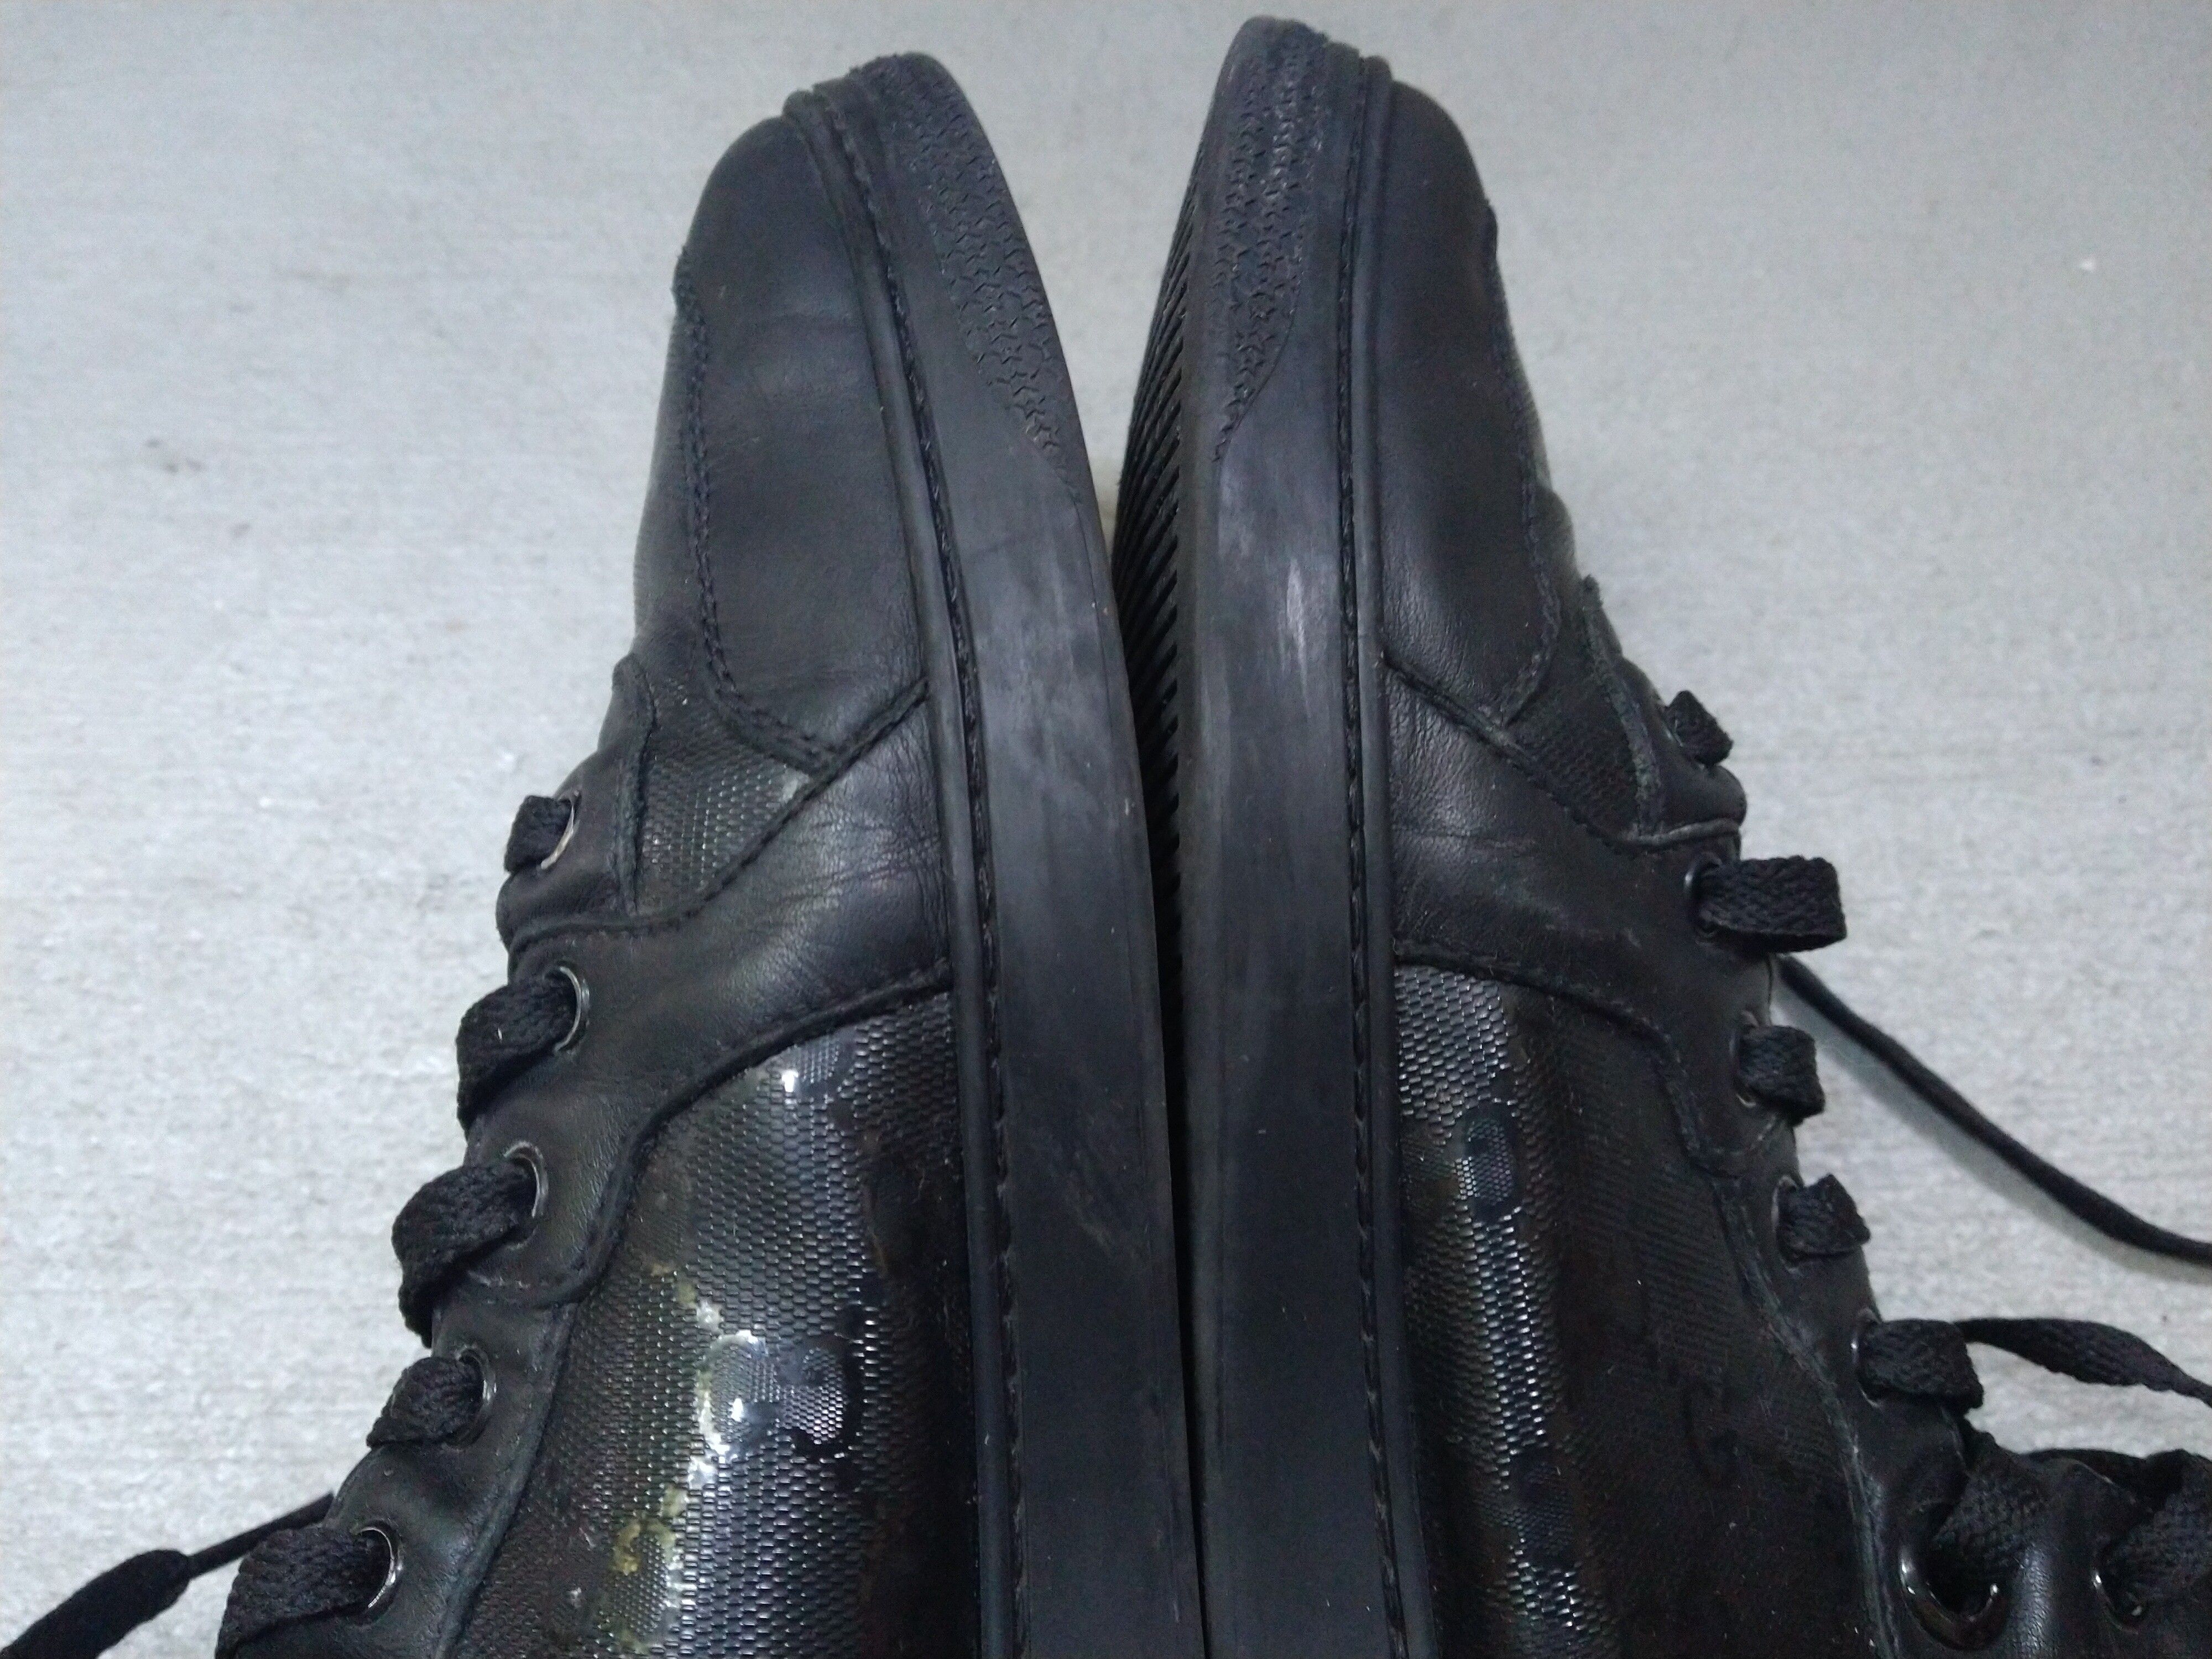 Gucci Gucci High Top Sneakers Black Leather Size 11 Lace Up Size US 11 / EU 44 - 7 Thumbnail